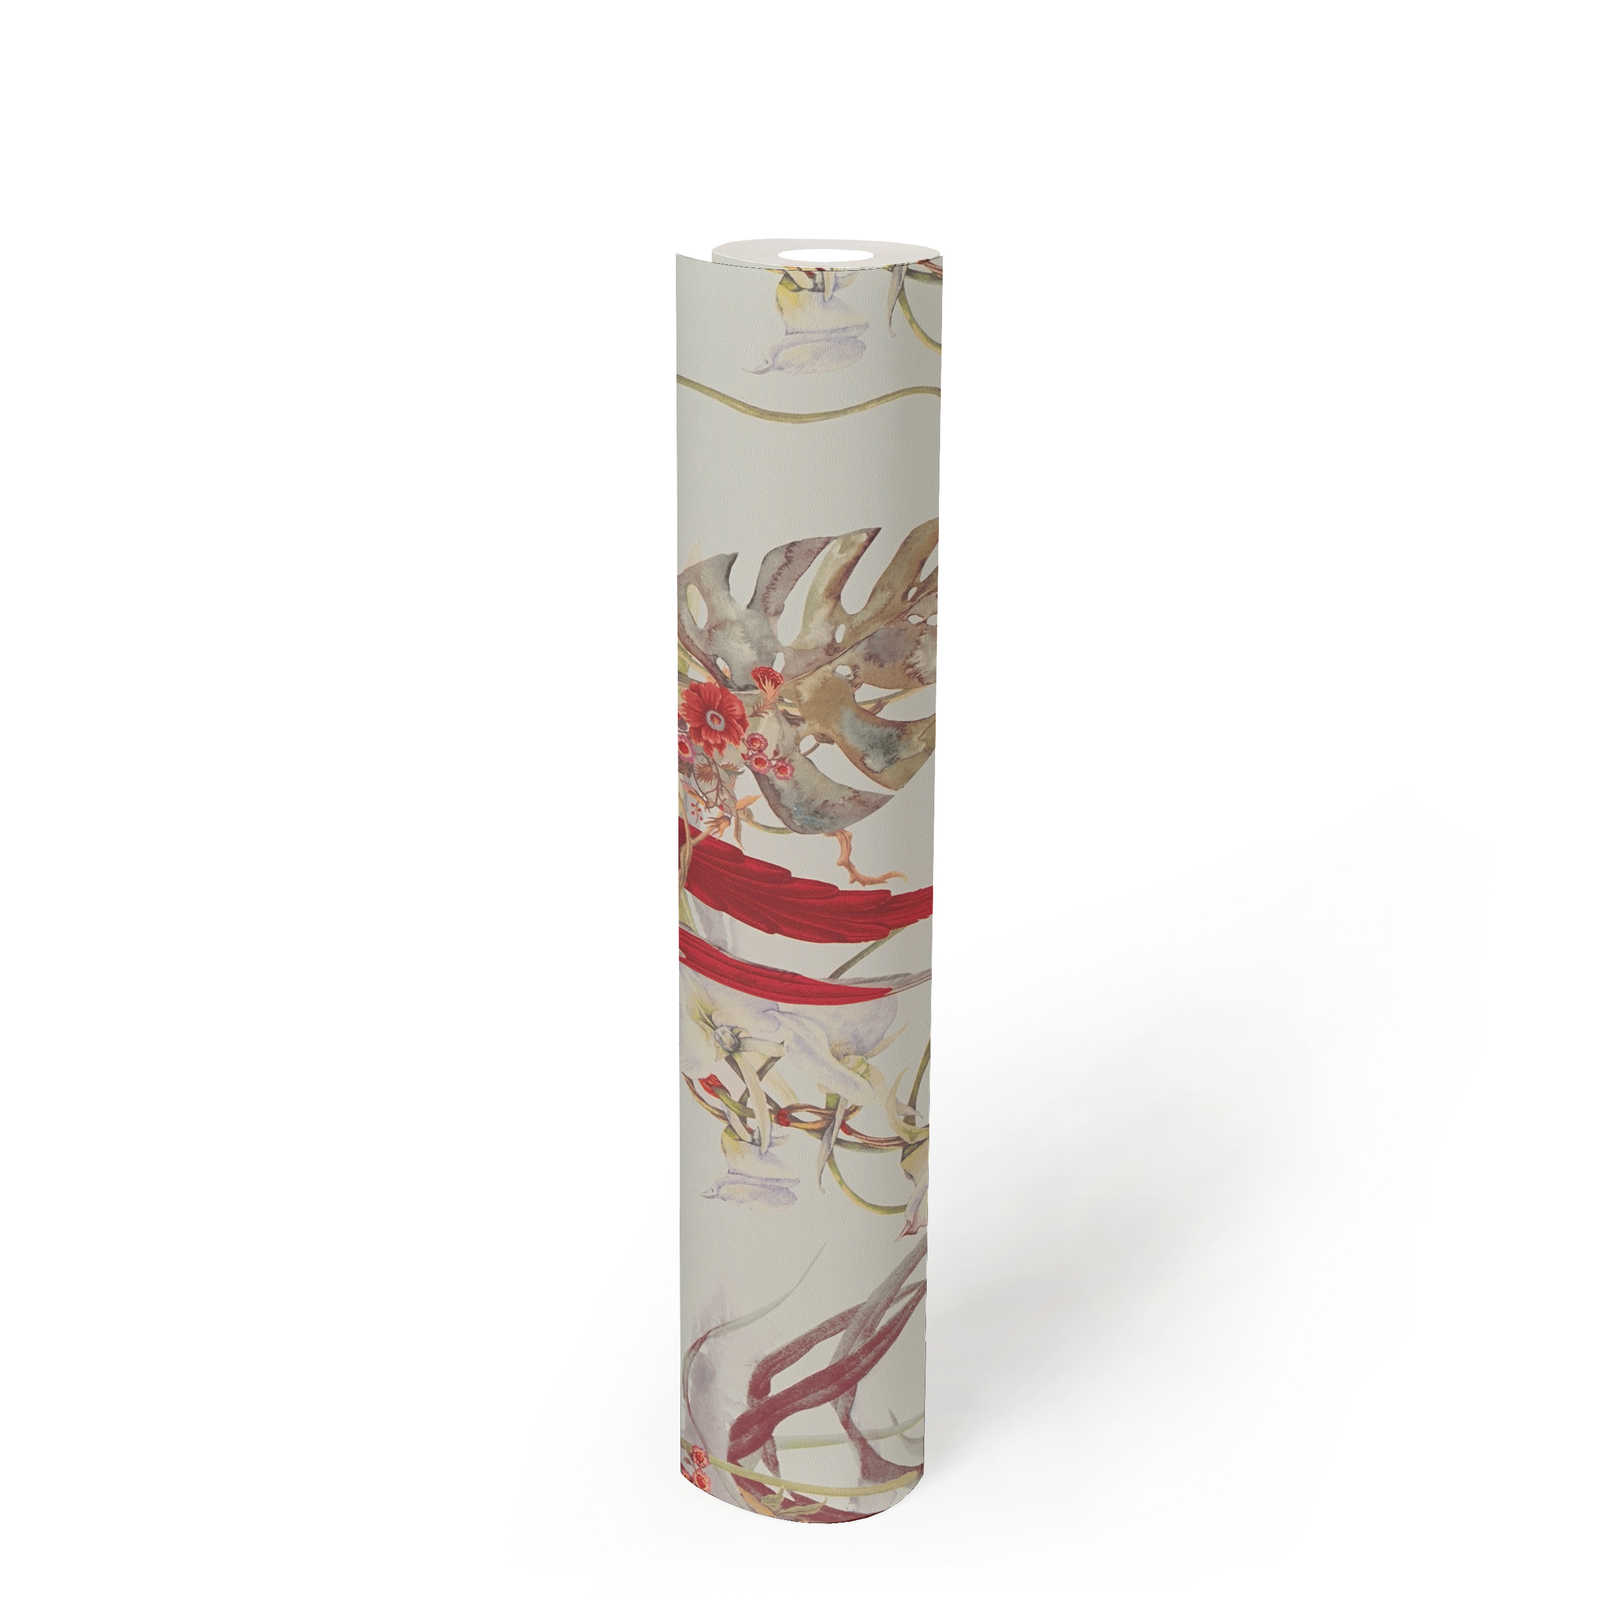             Wallpaper tropical design, parrot & exotic flowers - white, red
        